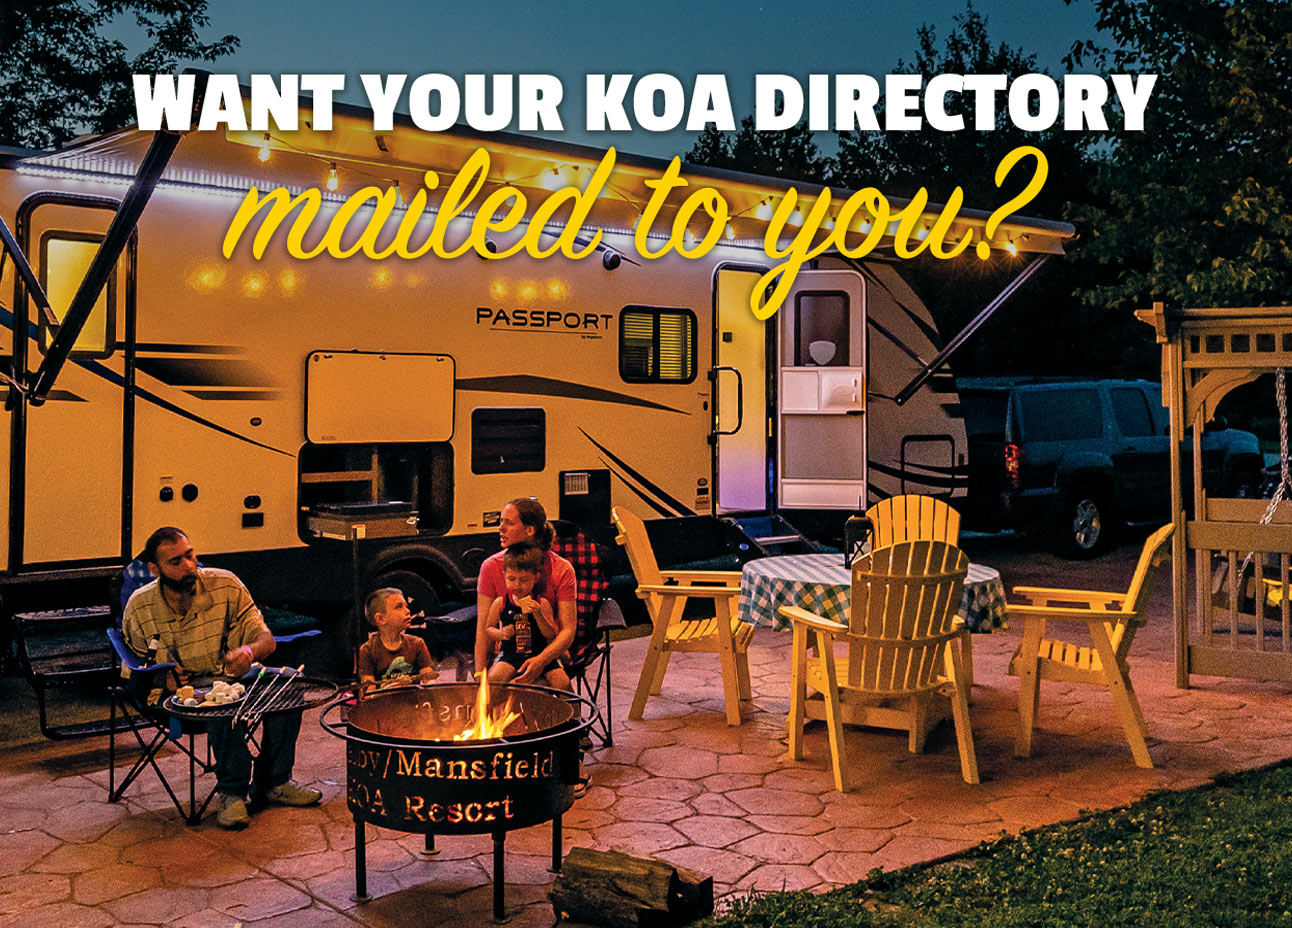 Want Your KOA Directory Mailed To You?